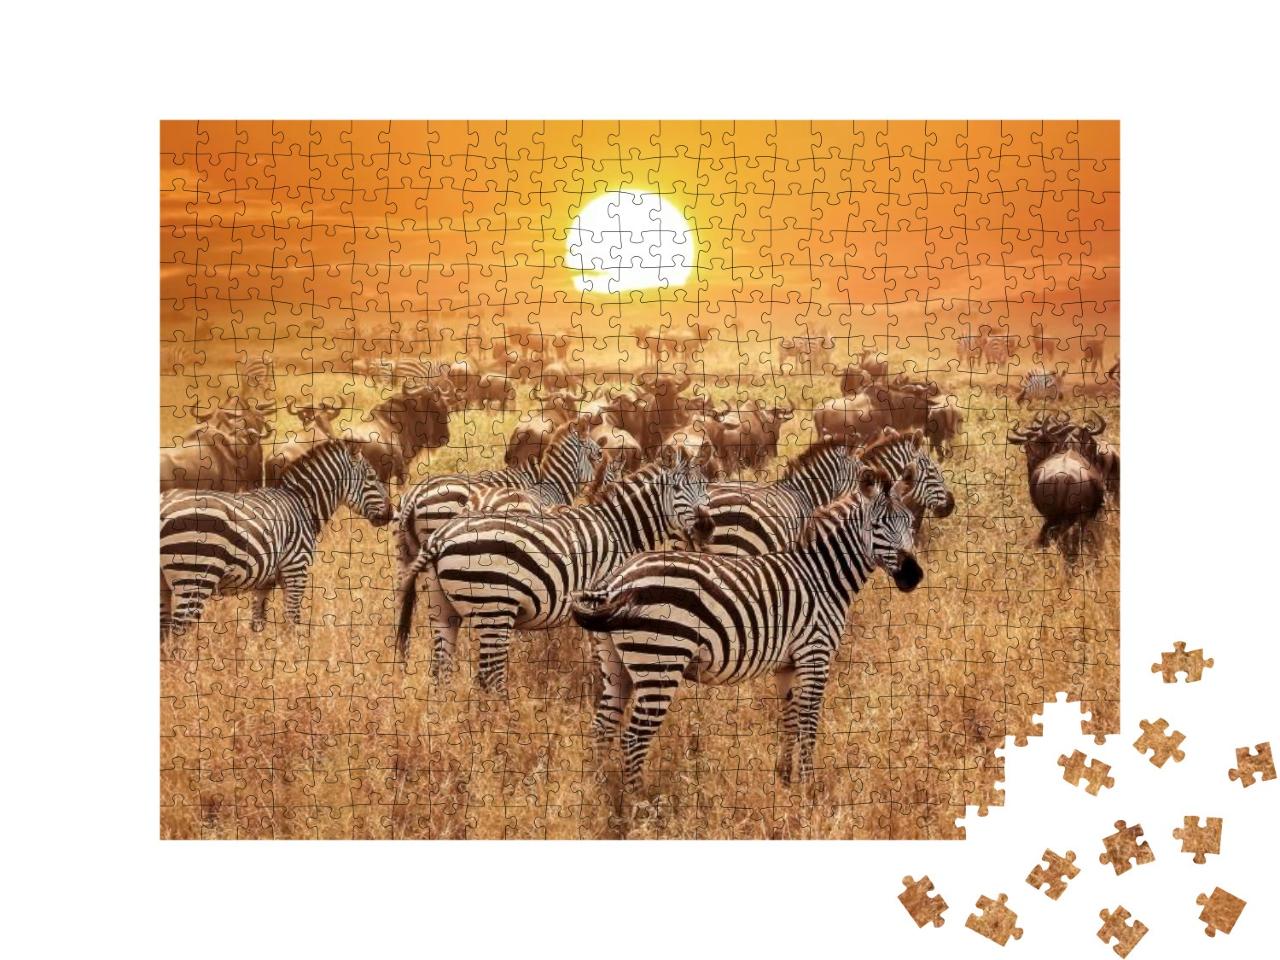 Zebra At Sunset in the Serengeti National Park. Africa. T... Jigsaw Puzzle with 500 pieces